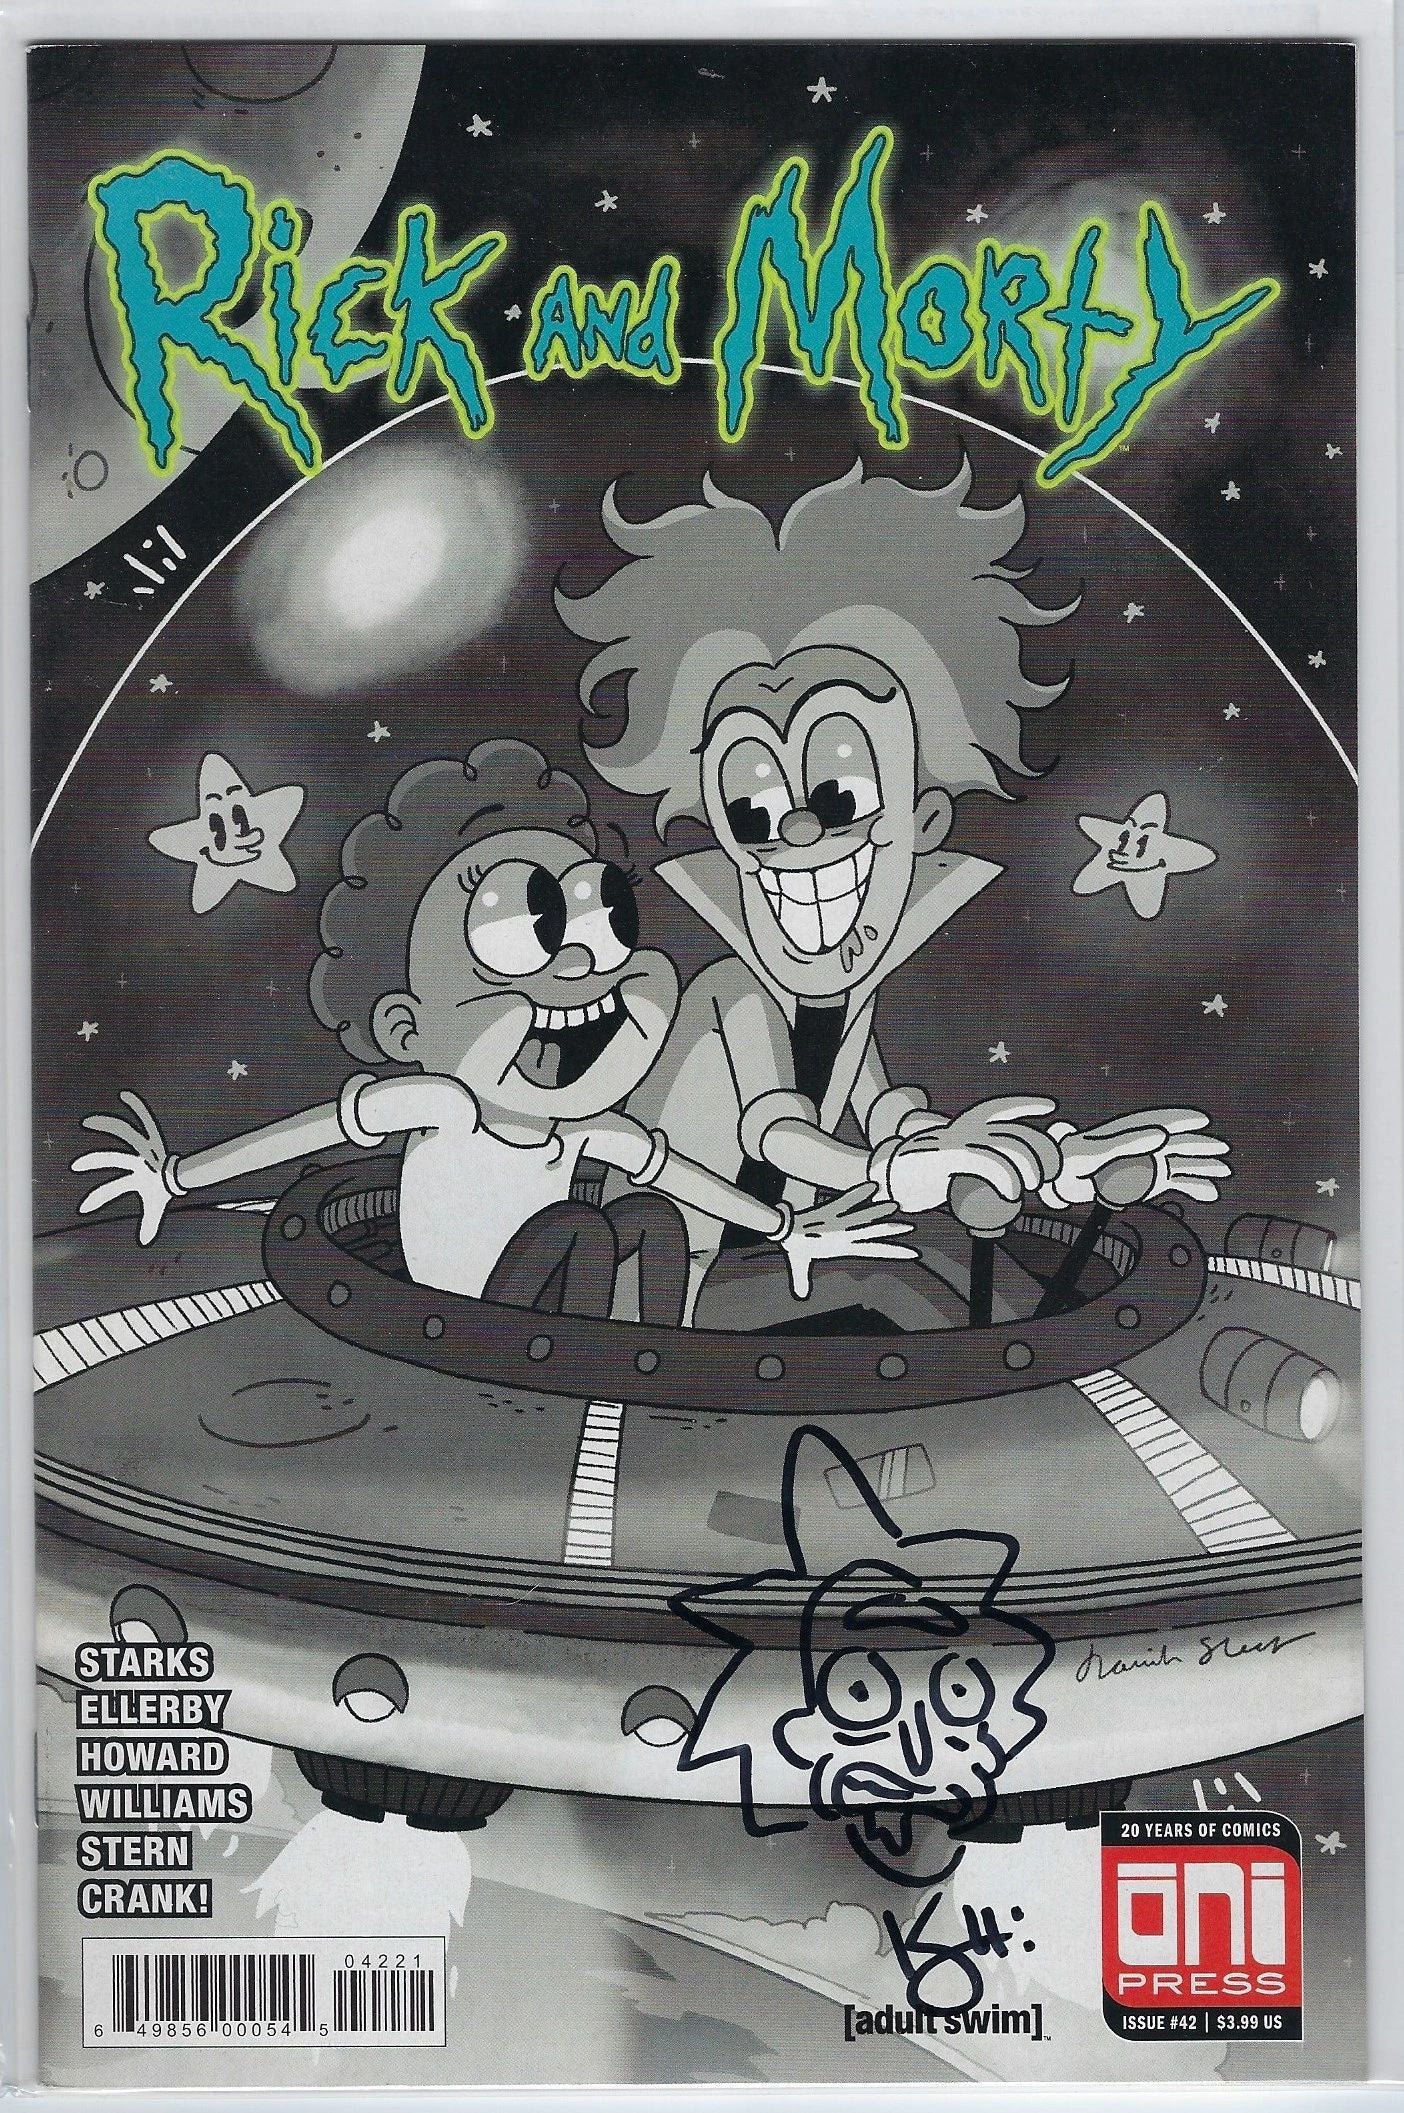 Kyle Starks Signed Rick & Morty Issue #42 Black & White with Remark of Professor W/Beckett COA